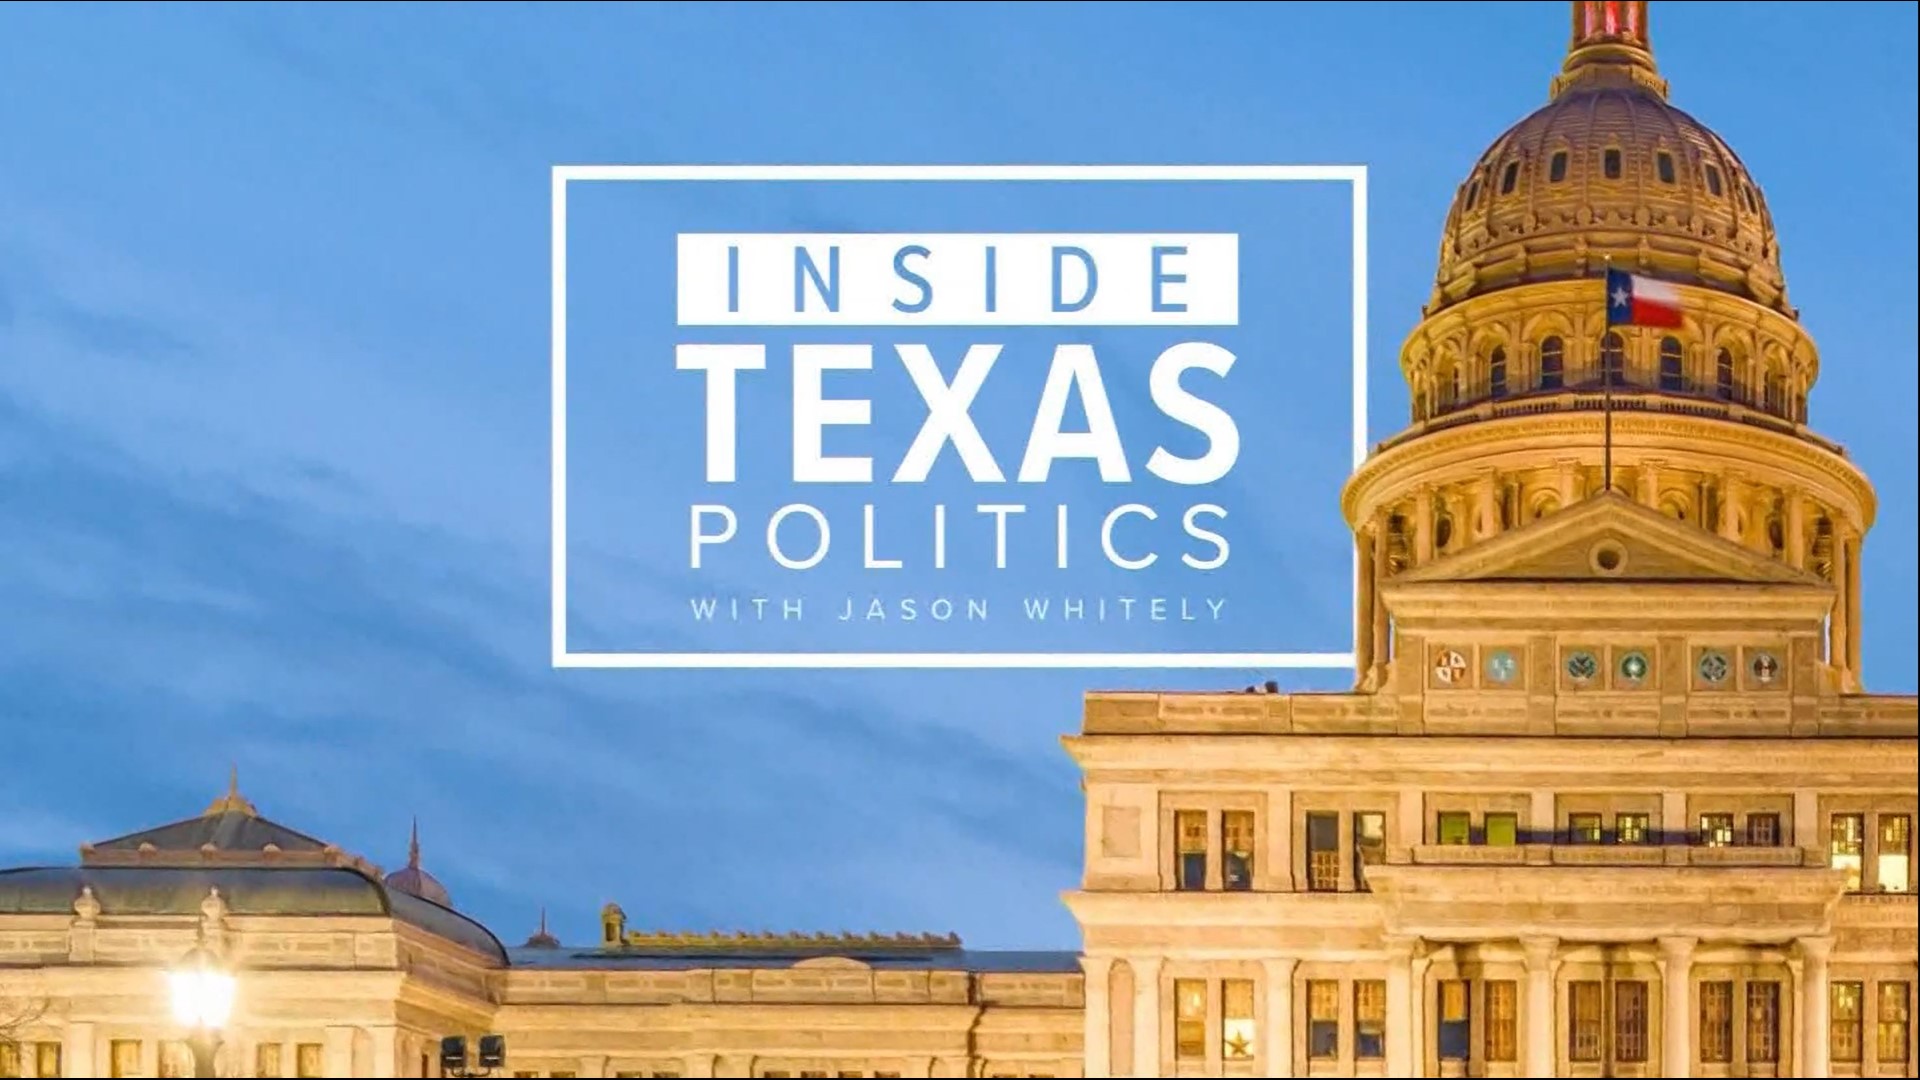 Texas Lt. Gov. Dan Patrick says he might force a special legislative session if conservative priorities don’t pass. Plus: How to modernize aging school districts.